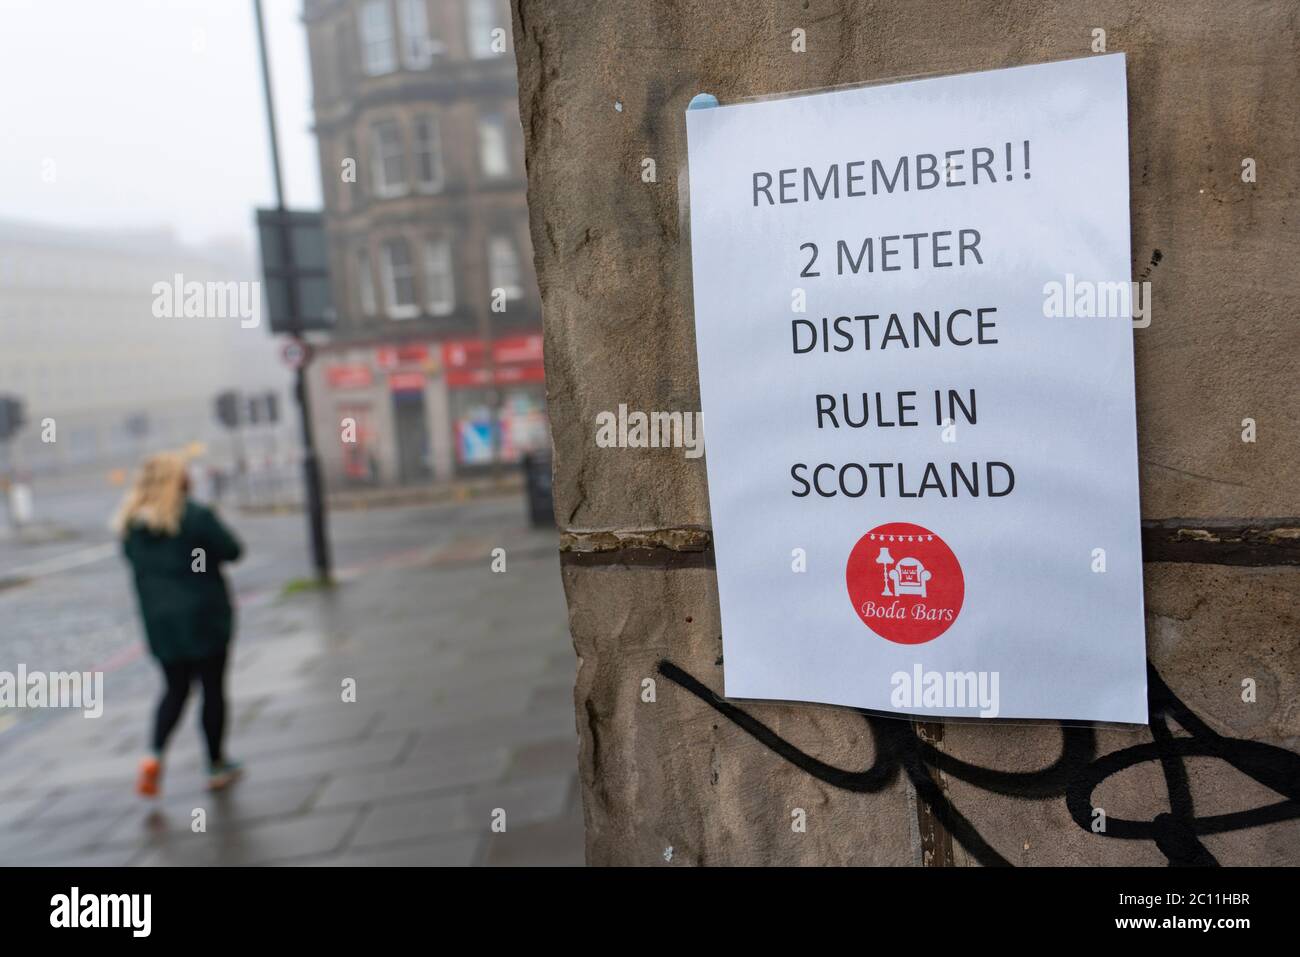 Edinburgh, Scotland, UK. 13 June 2020. On a foggy wet Saturday afternoon the streets of Edinburgh city centre remain very quiet and shops and businesses remain closed. Lockdown is expected to be relaxed next month.  Social distancing remains 2m in Scotland warning sign on pub wall. Iain Masterton/Alamy Live News Stock Photo